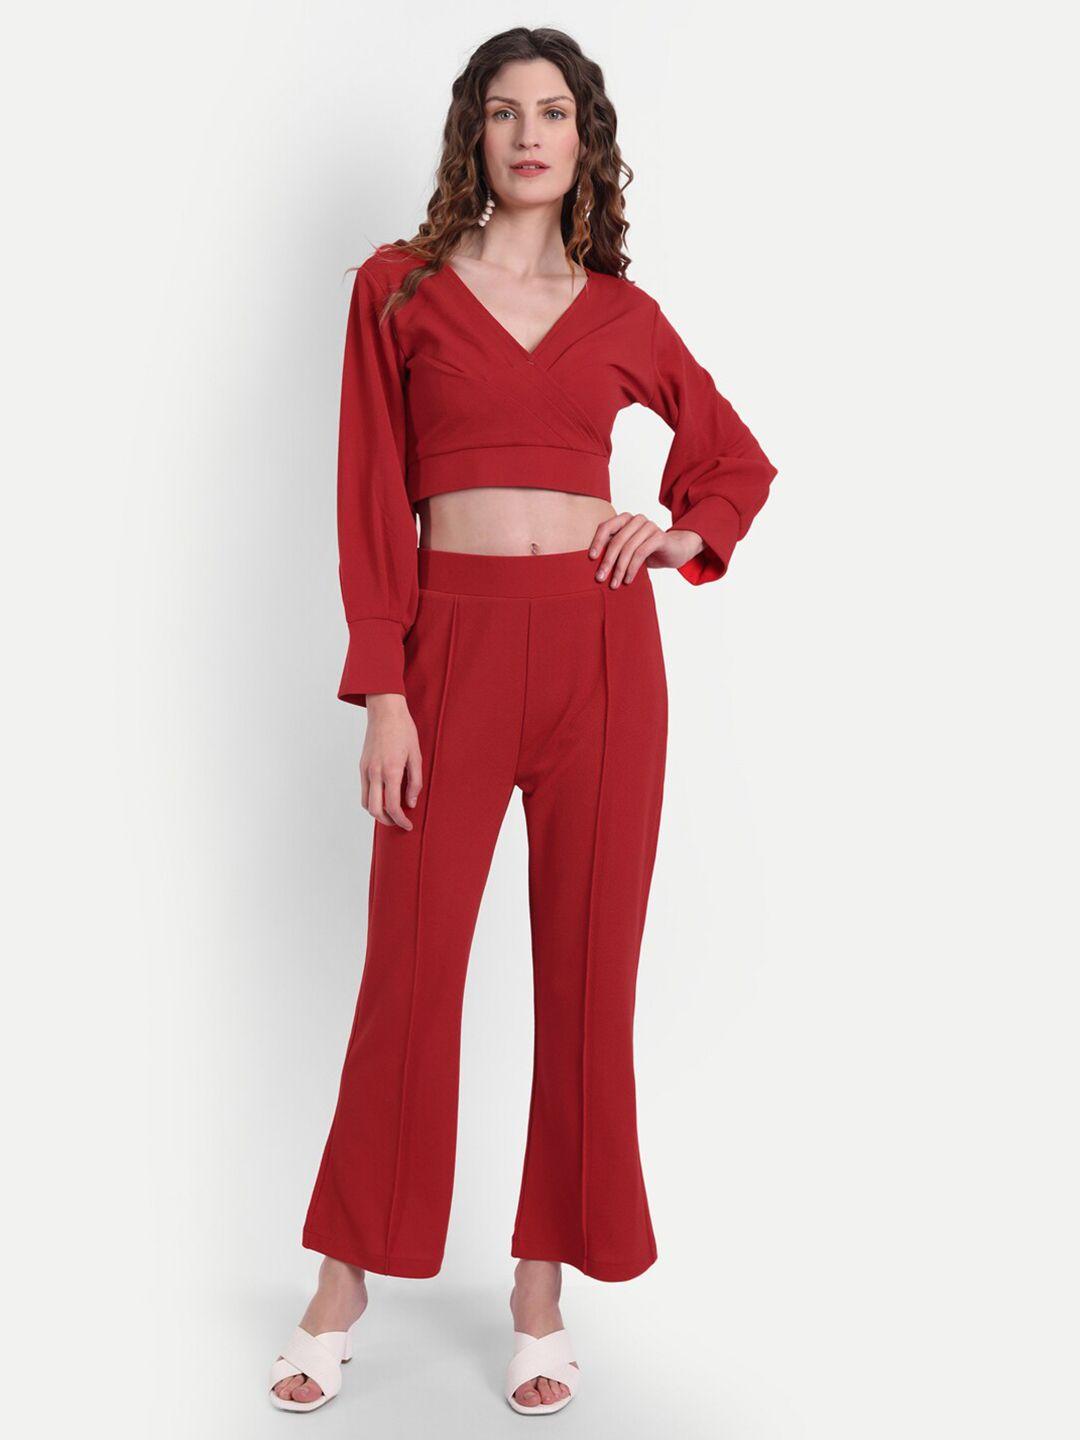 broadstar red co-ord set